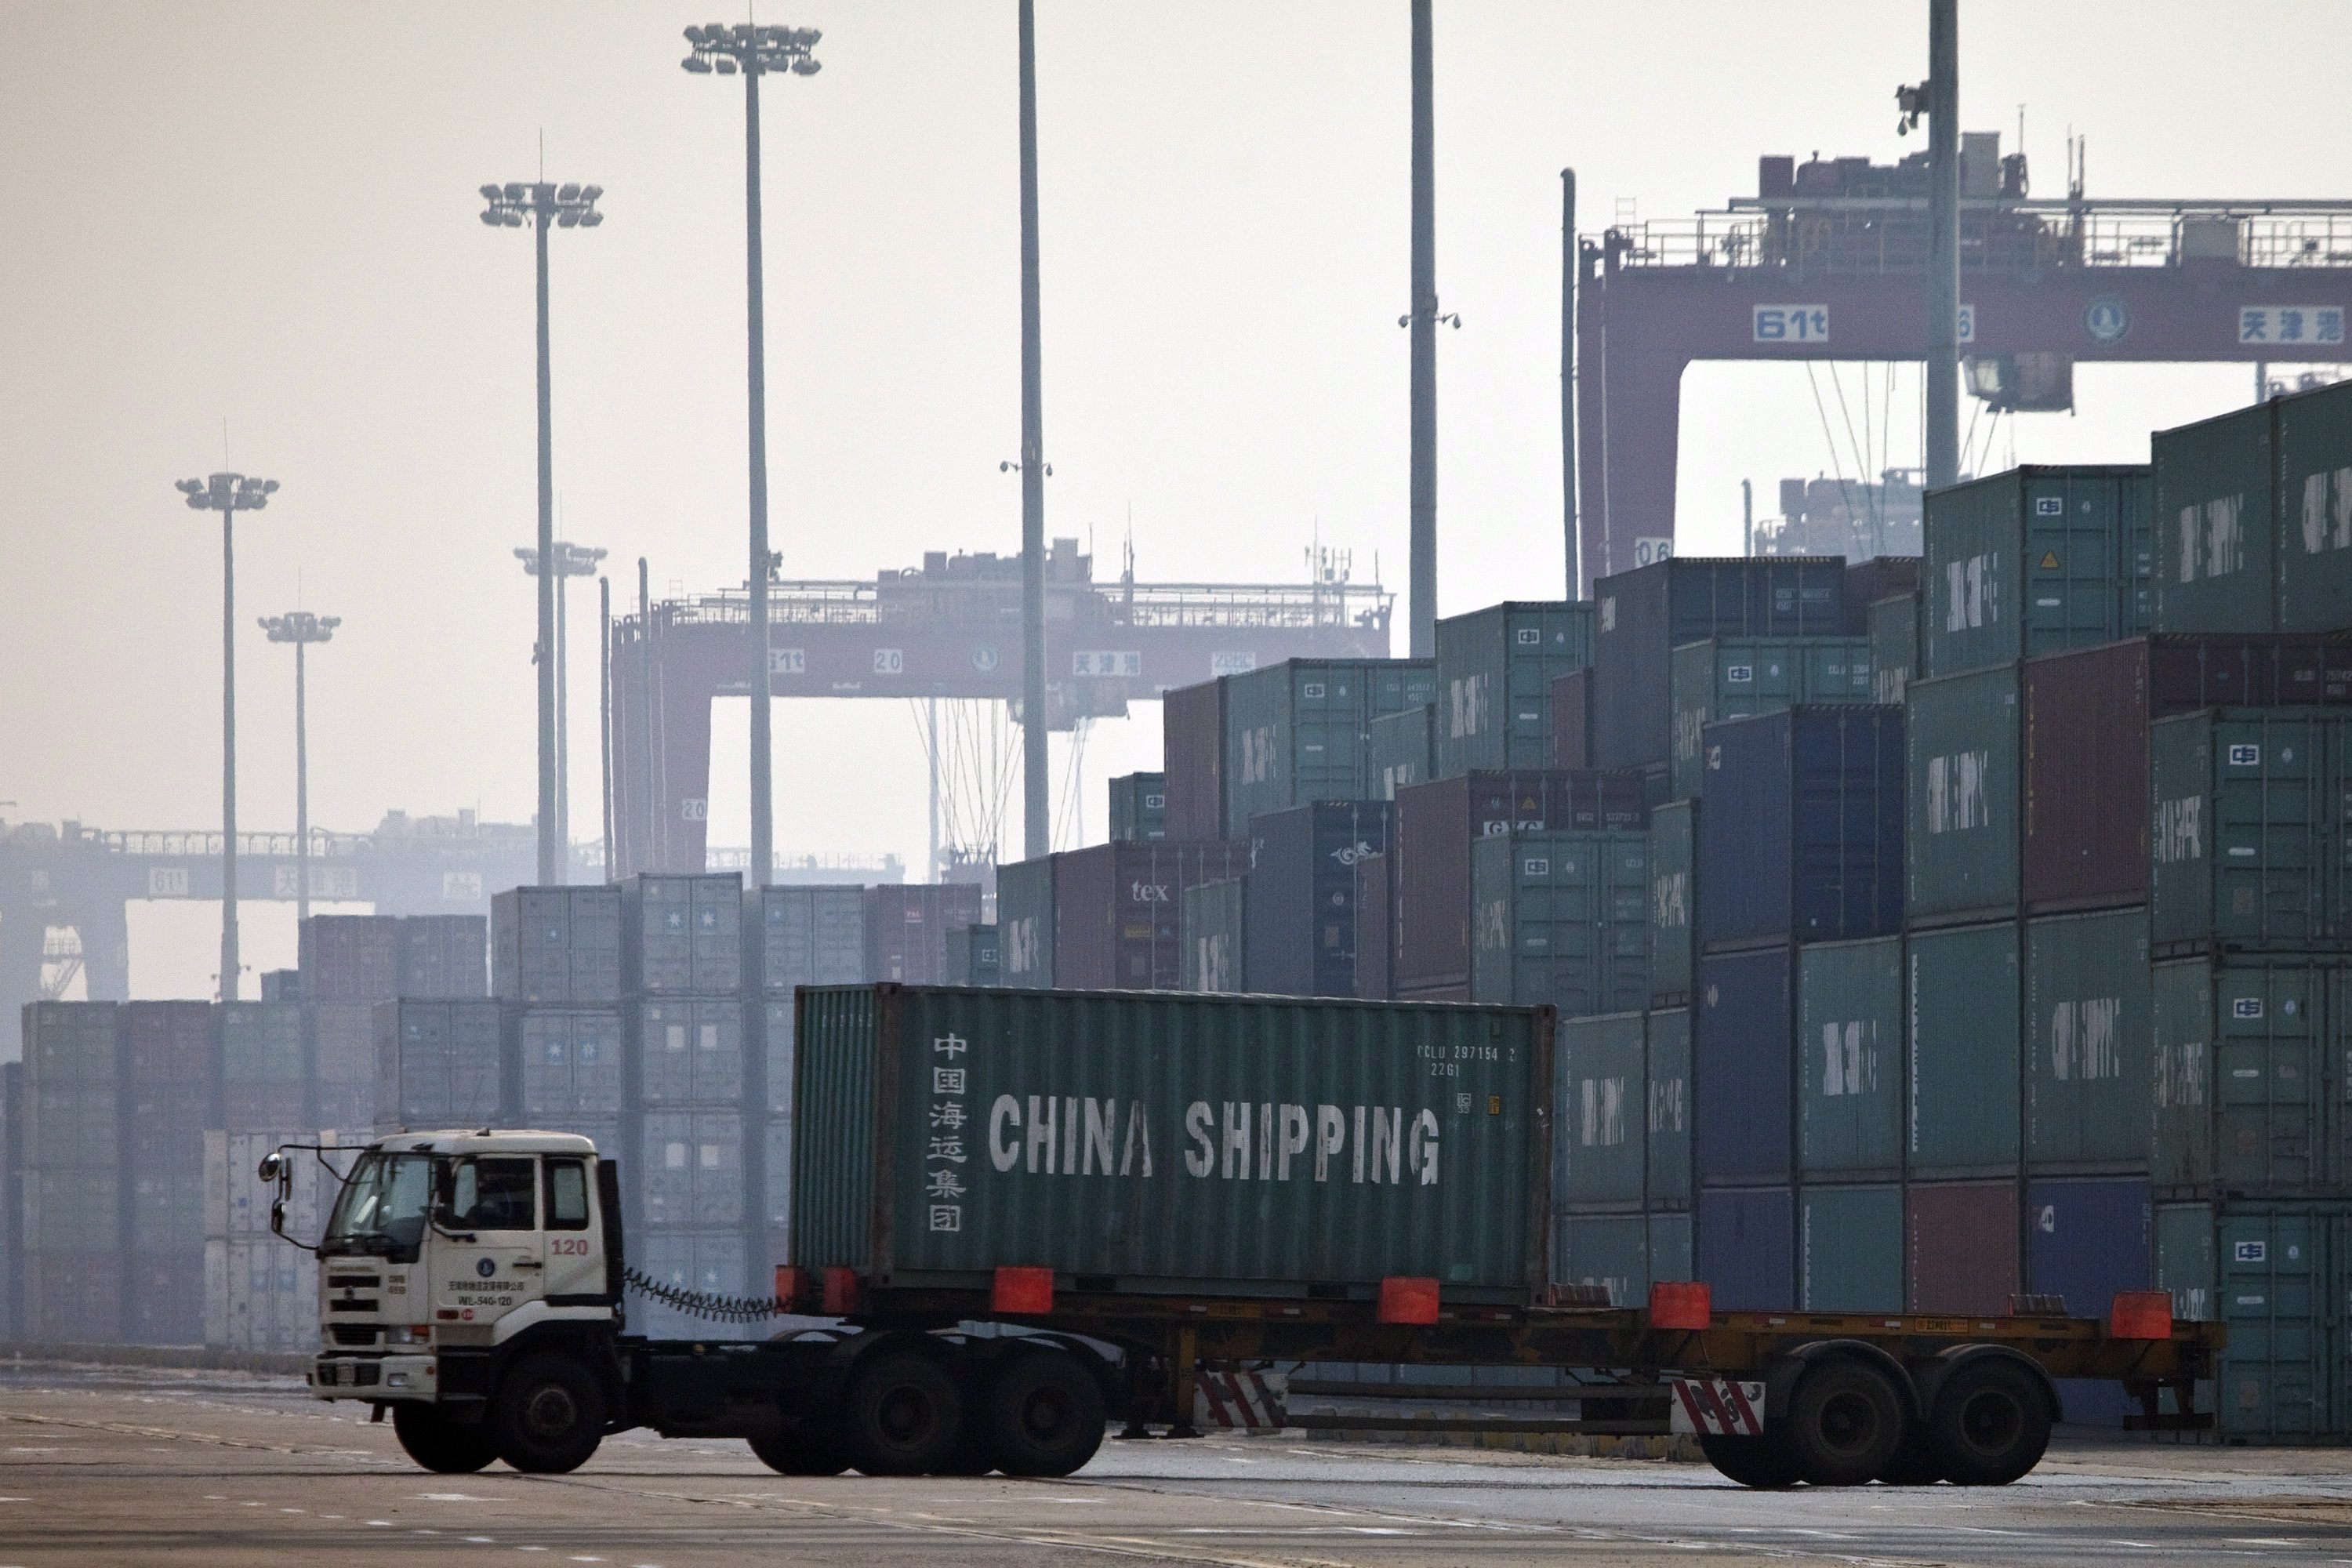 Canadians Warn Feds on Free Trade With China